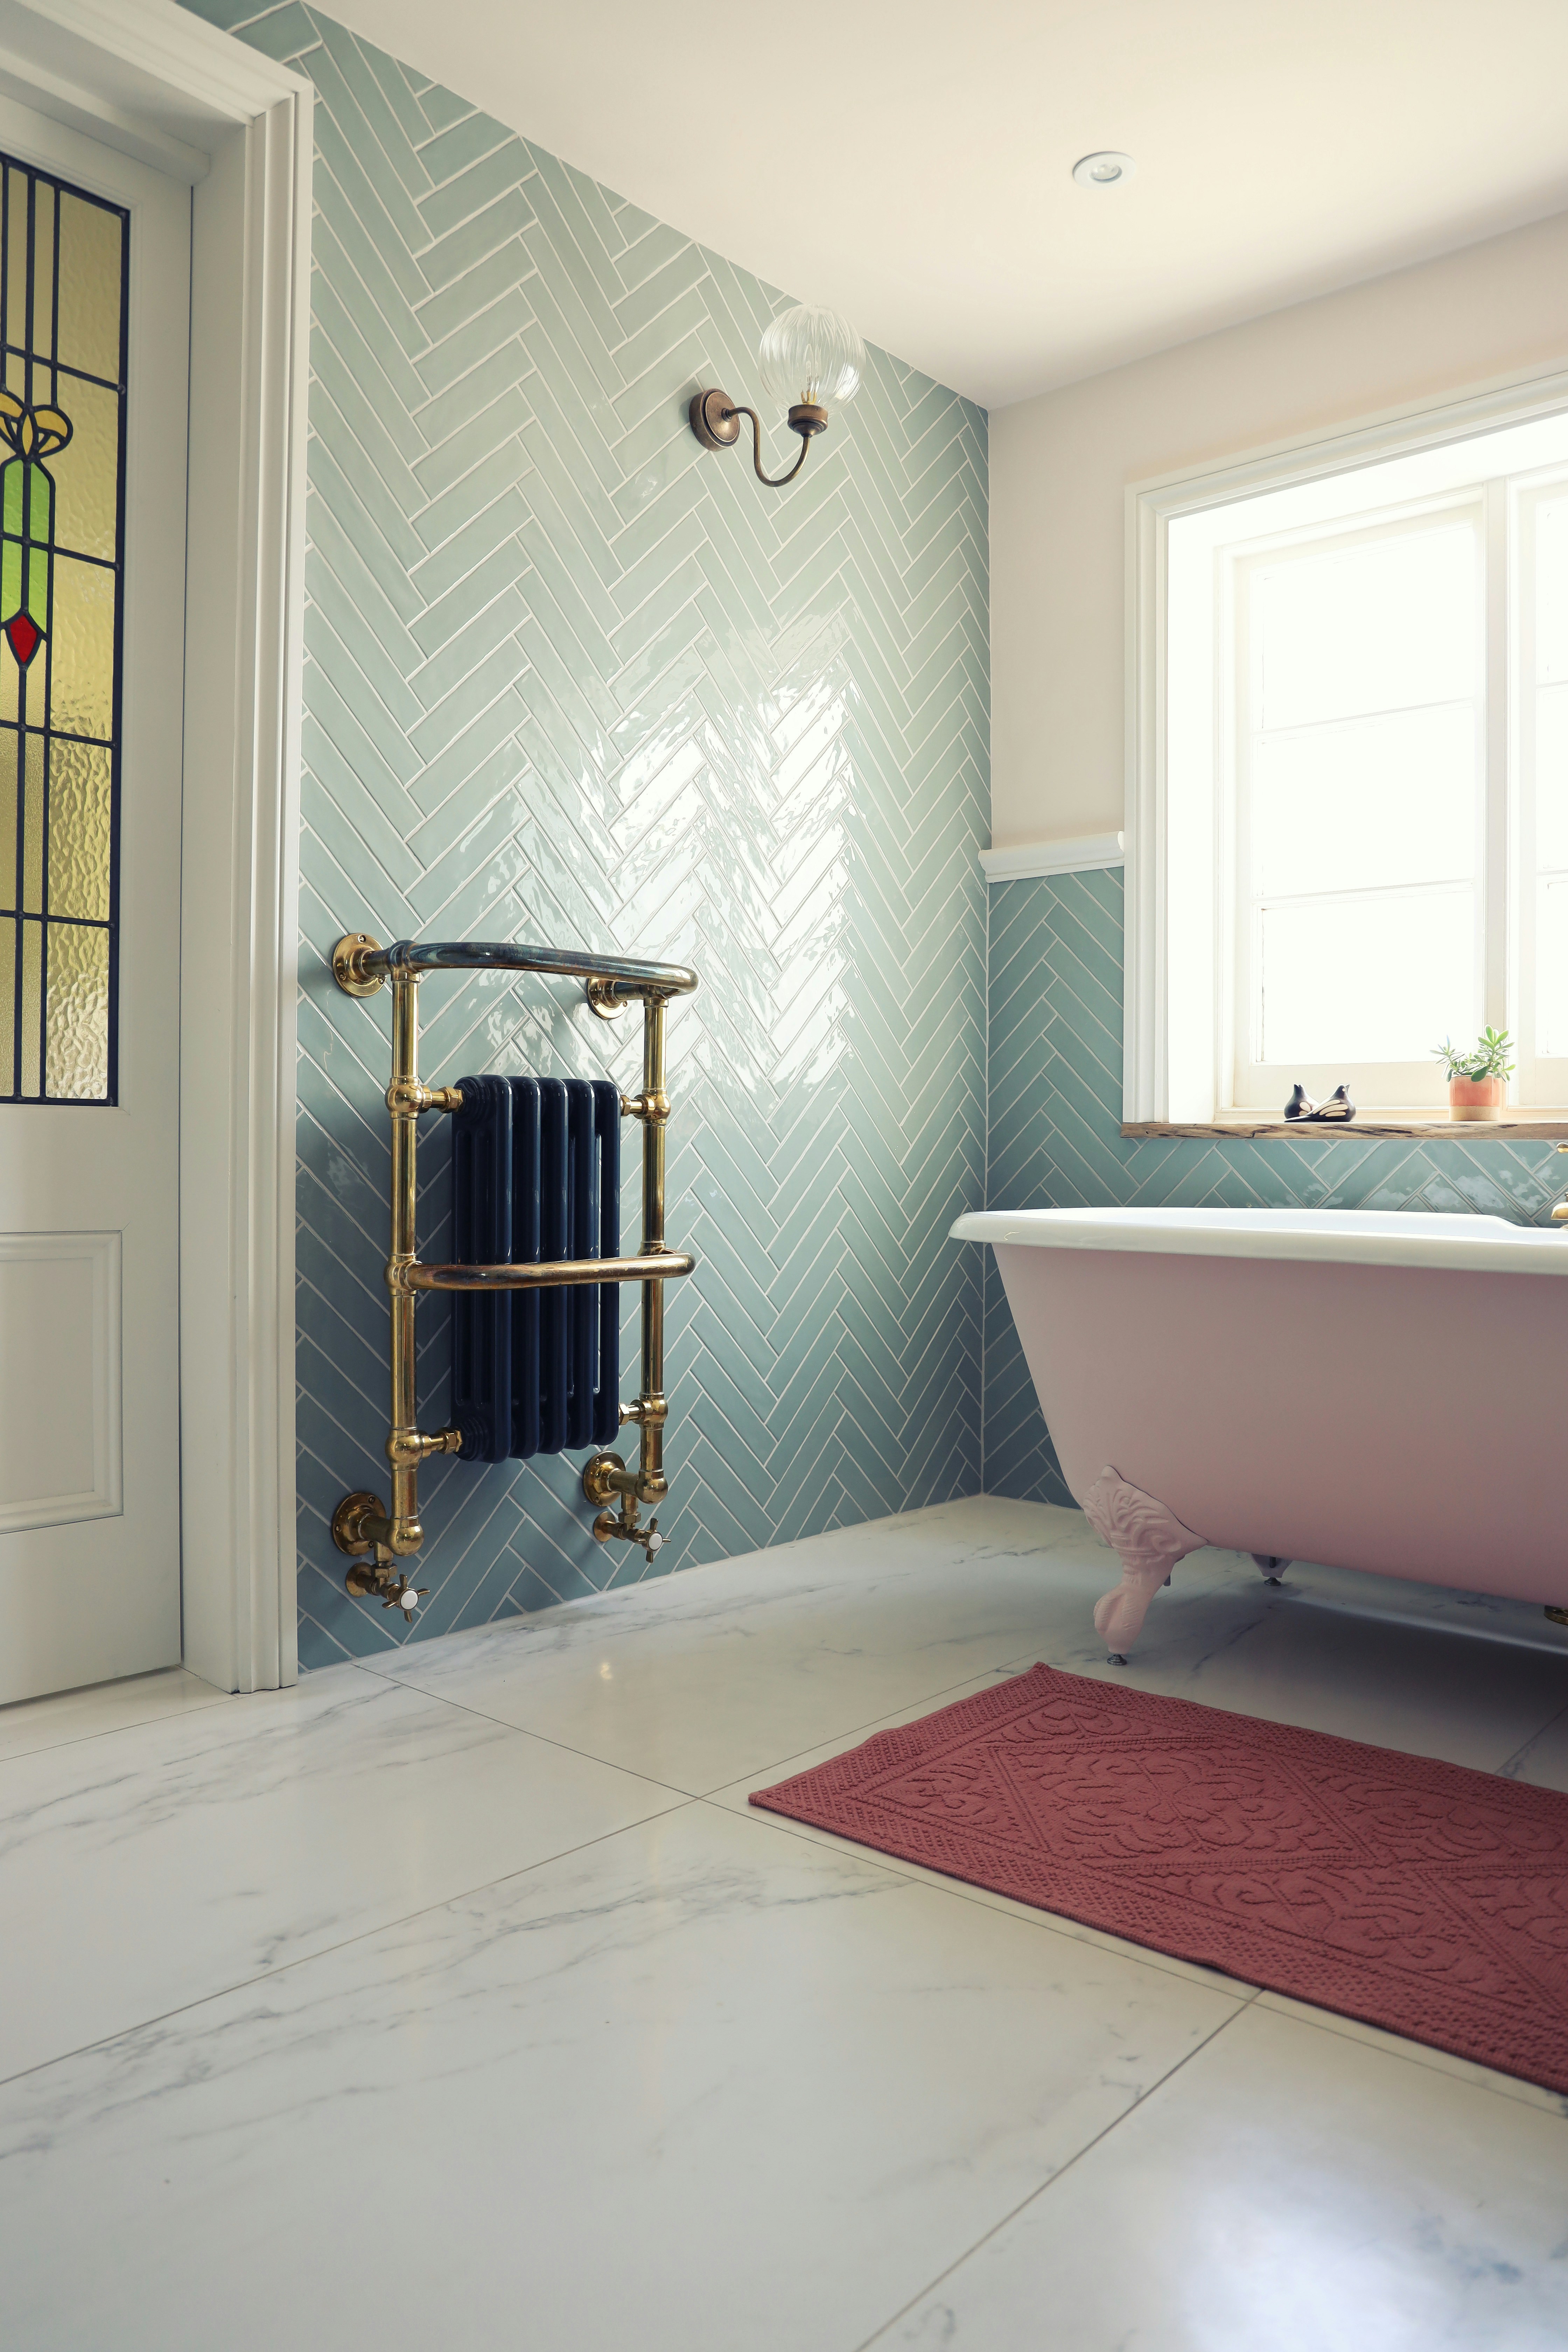 This traditional bathroom uses large-format floor tiles and wall tiles in a herringbone pattern, creating a layered aesthetic.